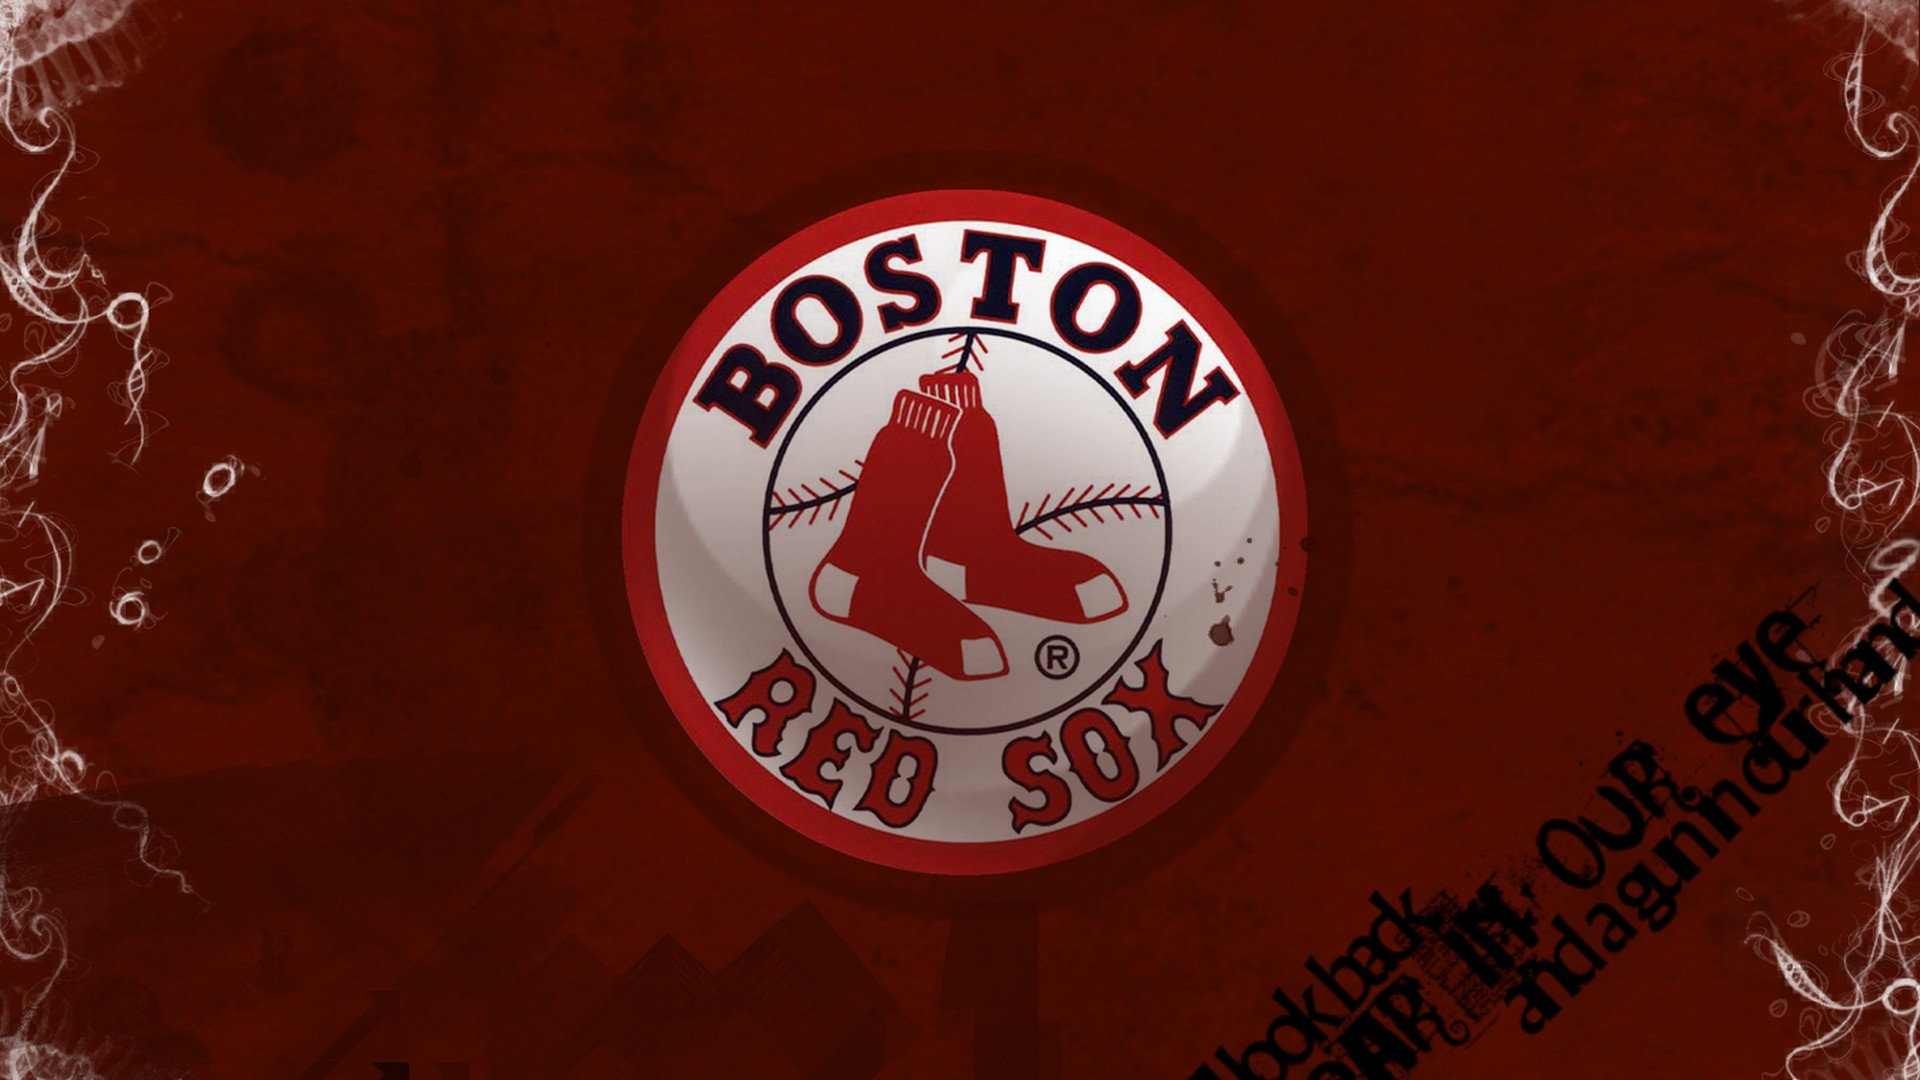 Boston Red Sox Wallpaper HD With high-resolution 1920X1080 pixel. You can use this wallpaper for Mac Desktop Wallpaper, Laptop Screensavers, Android Wallpapers, Tablet or iPhone Home Screen and another mobile phone device